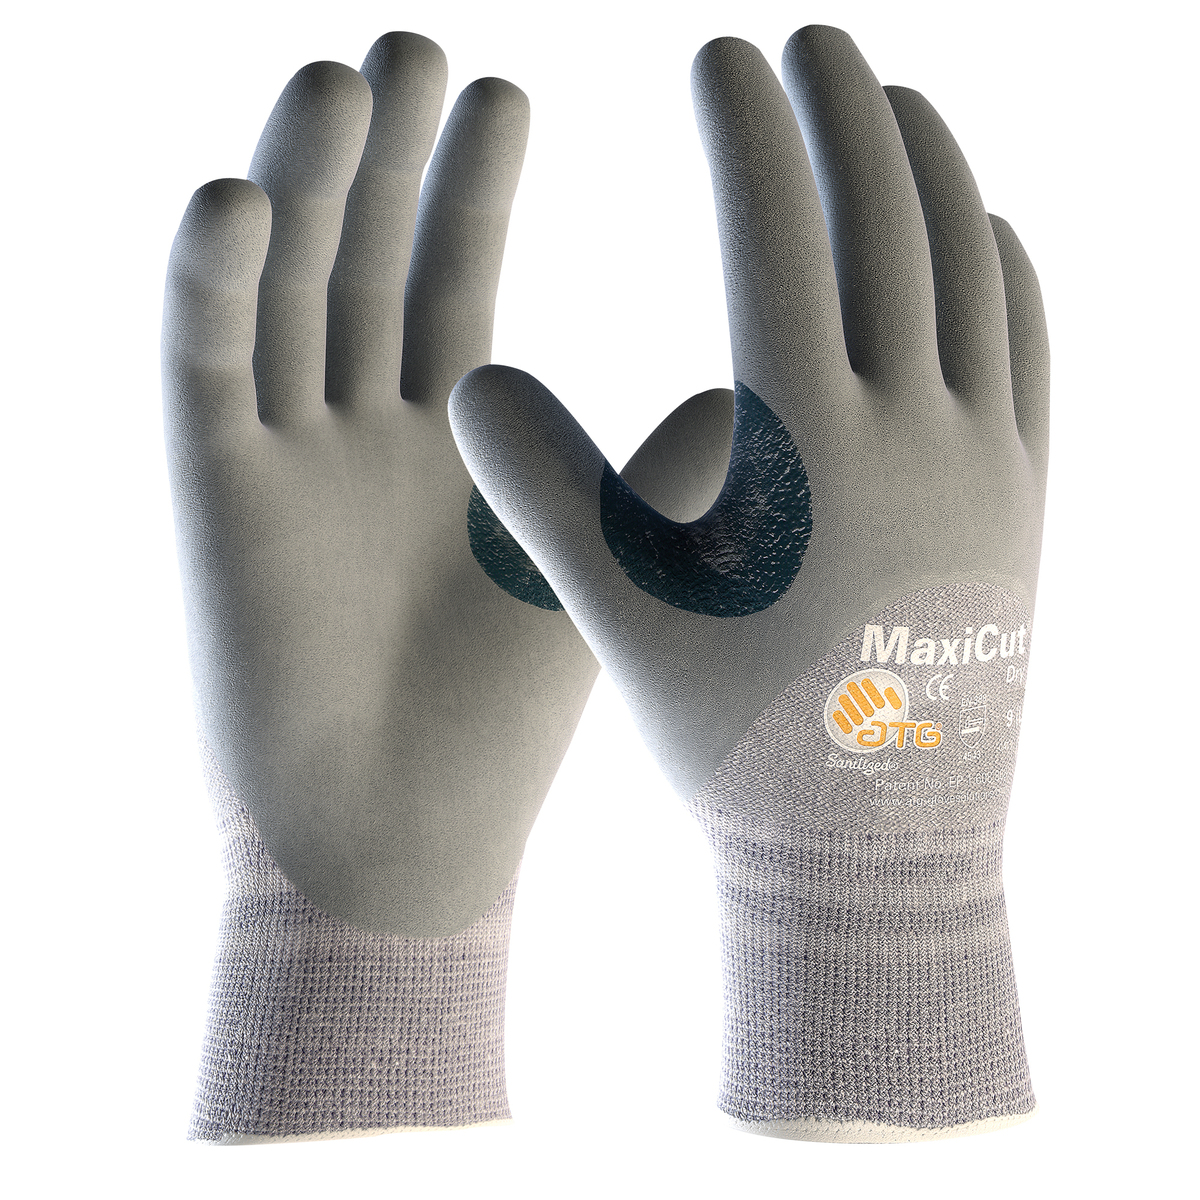 PIP® 2X MaxiCut® Dry 13 Gauge Dyneema® And Glass And LYCRA® And Nylon Cut Resistant Gloves With Micro-Foam Nitrile Coating